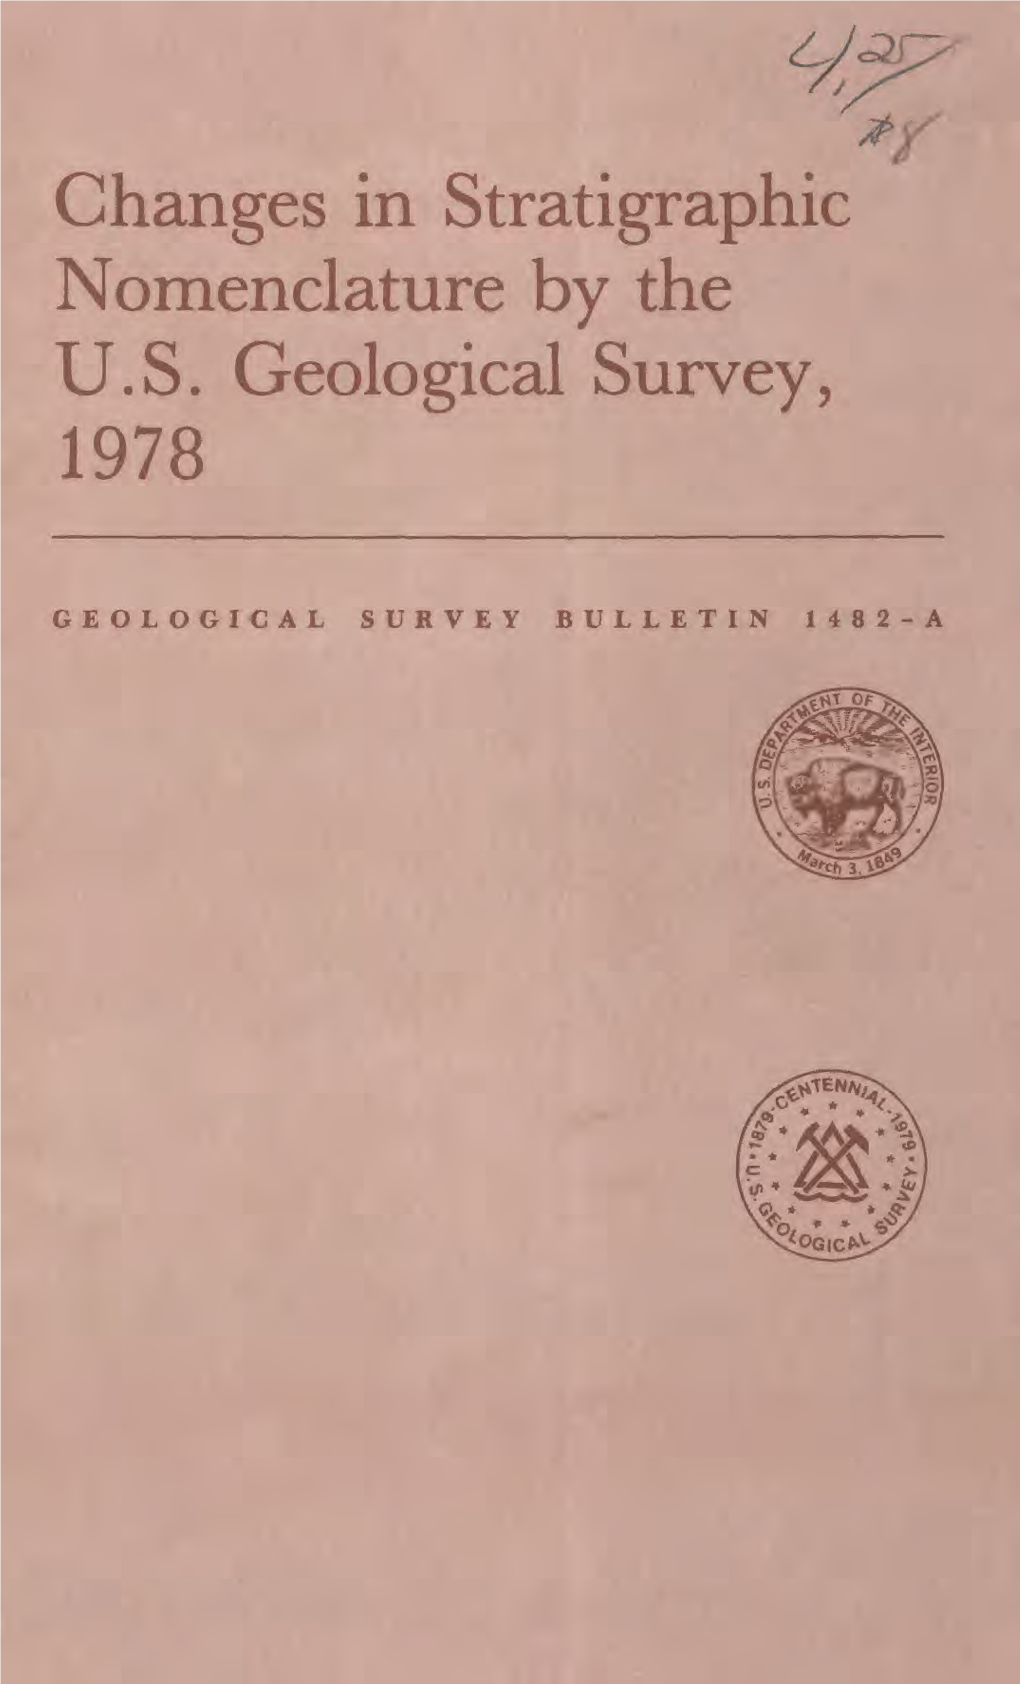 Changes in Stratigraphic Nomenclature by the U.S. Geological Survey, 1978